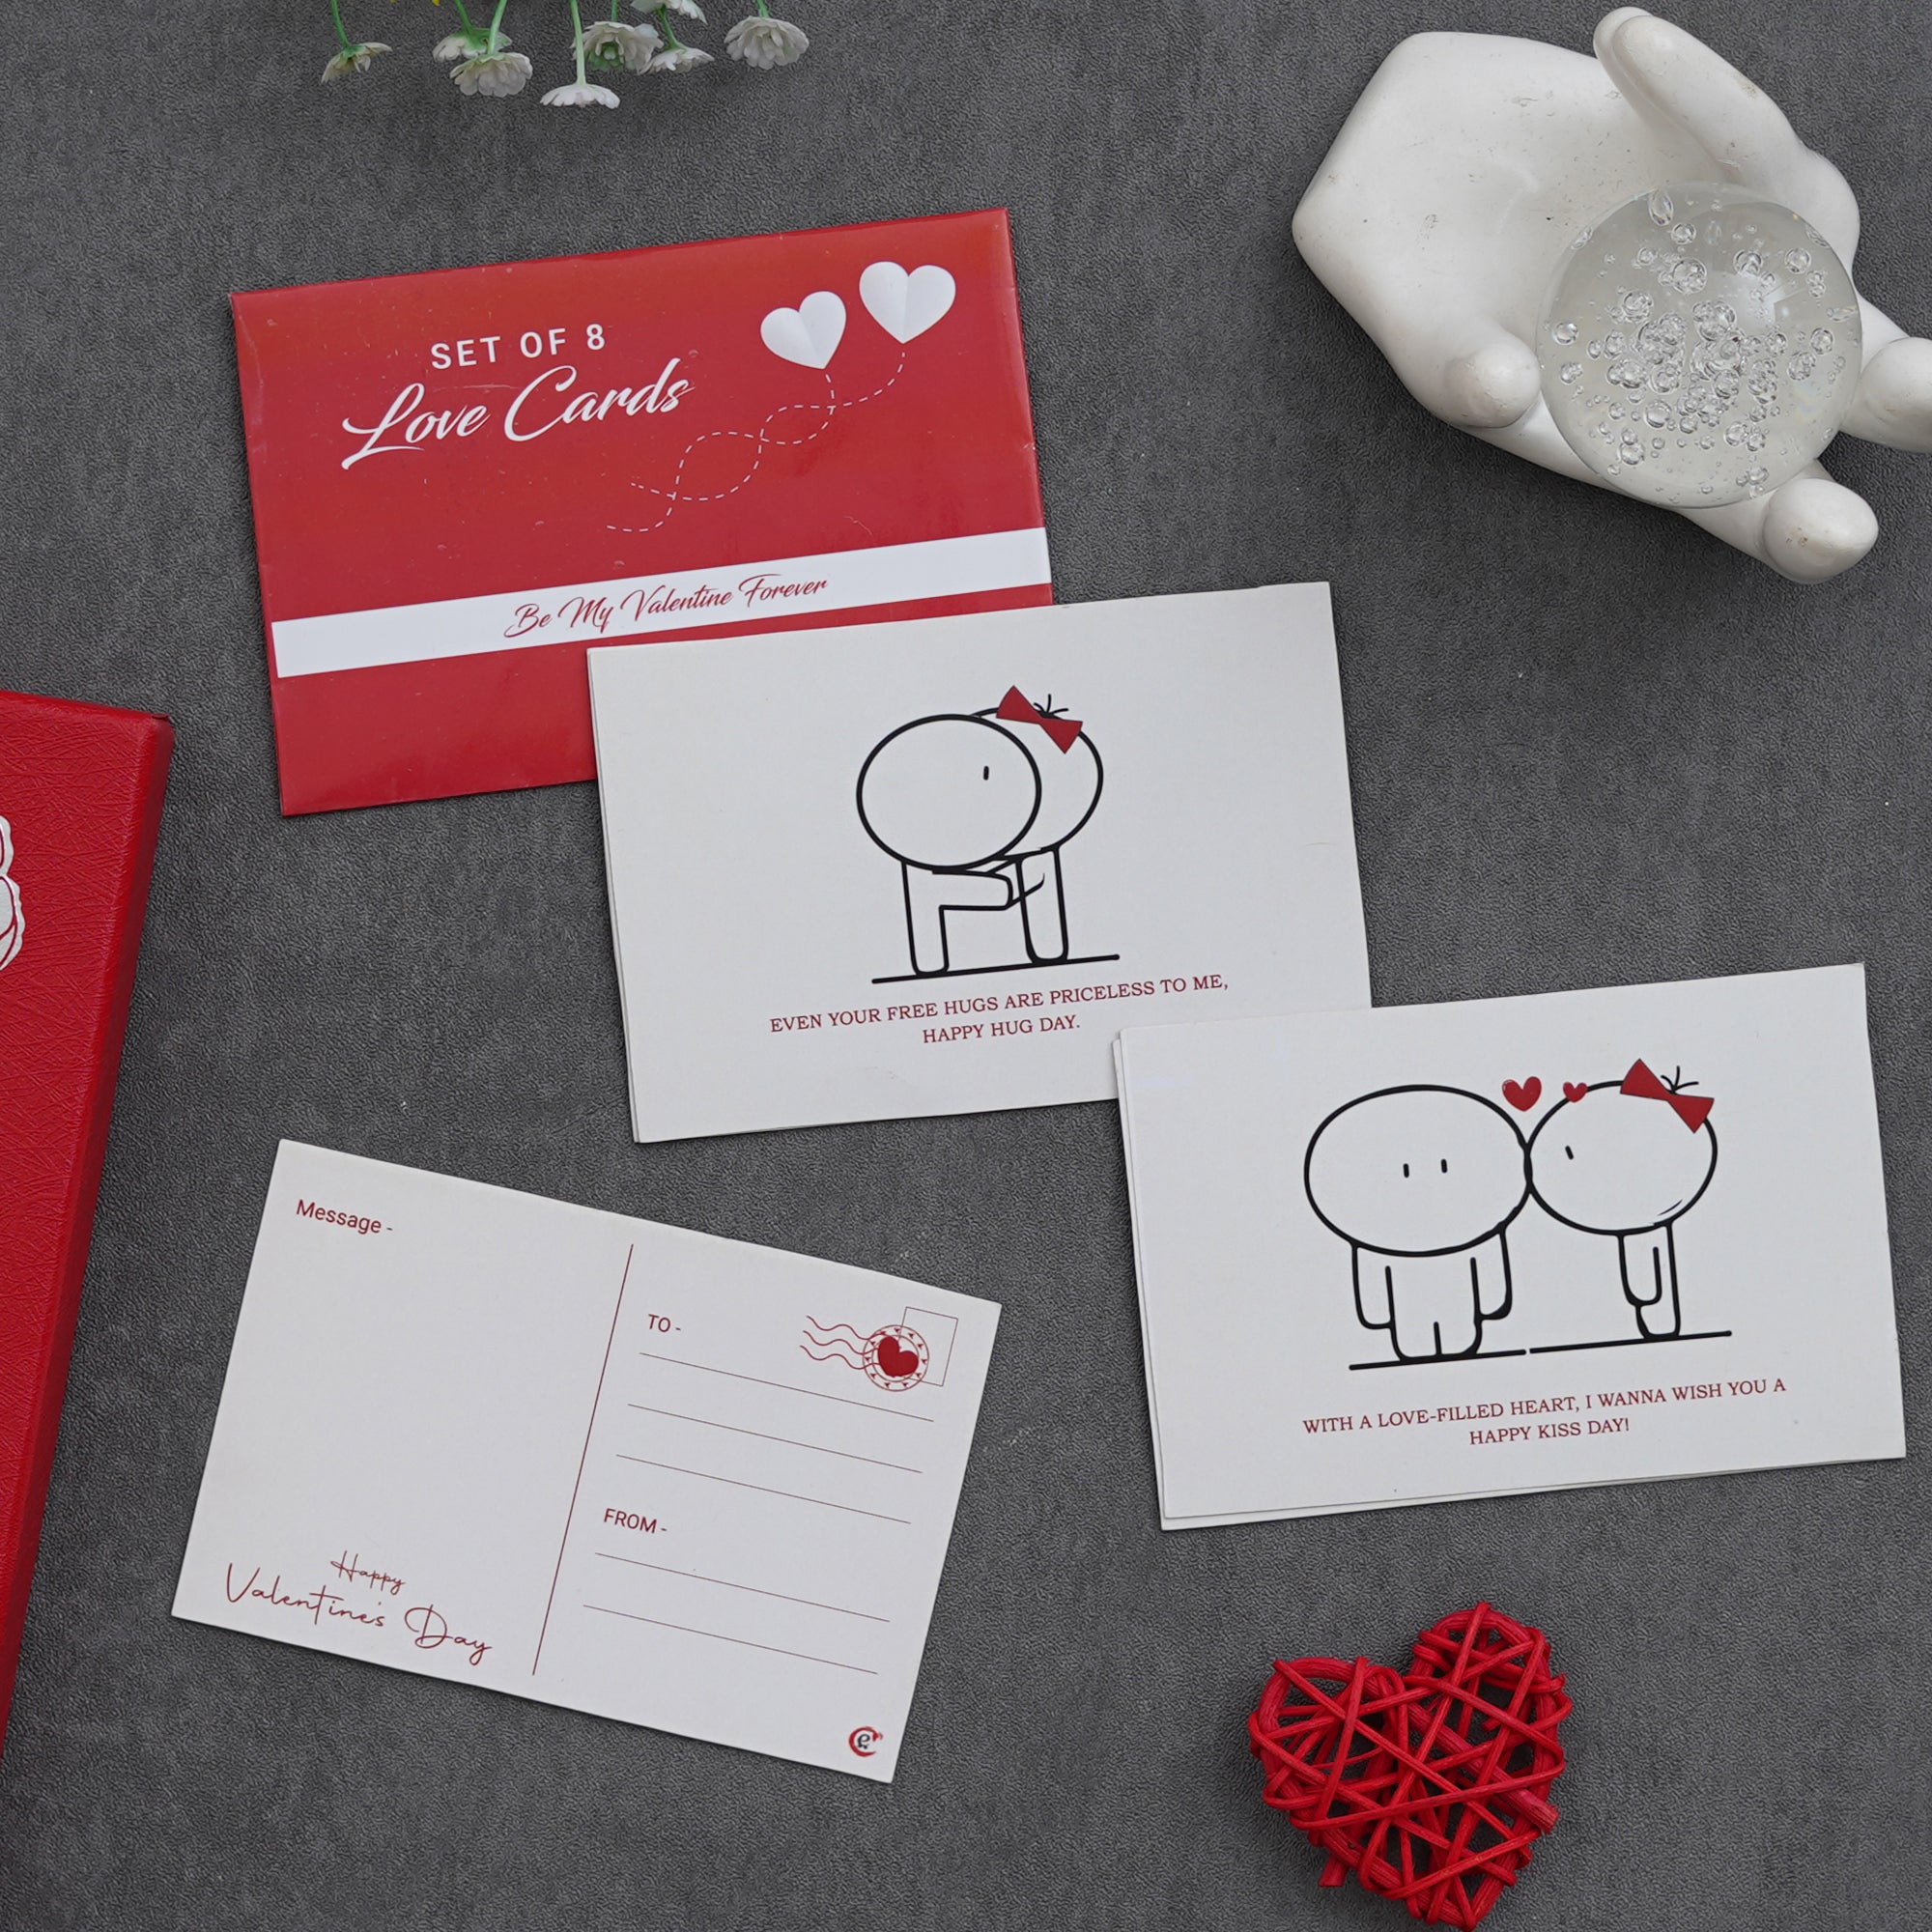 Valentine Combo of Set of 8 Love Post Cards Gift Cards Set, "20 Reasons Why I Need You" Printed on Little Hearts Wooden Gift Set, Red Roses Bouquet and White, Red Teddy Bear Valentine's Rectangle Shaped Gift Box 1